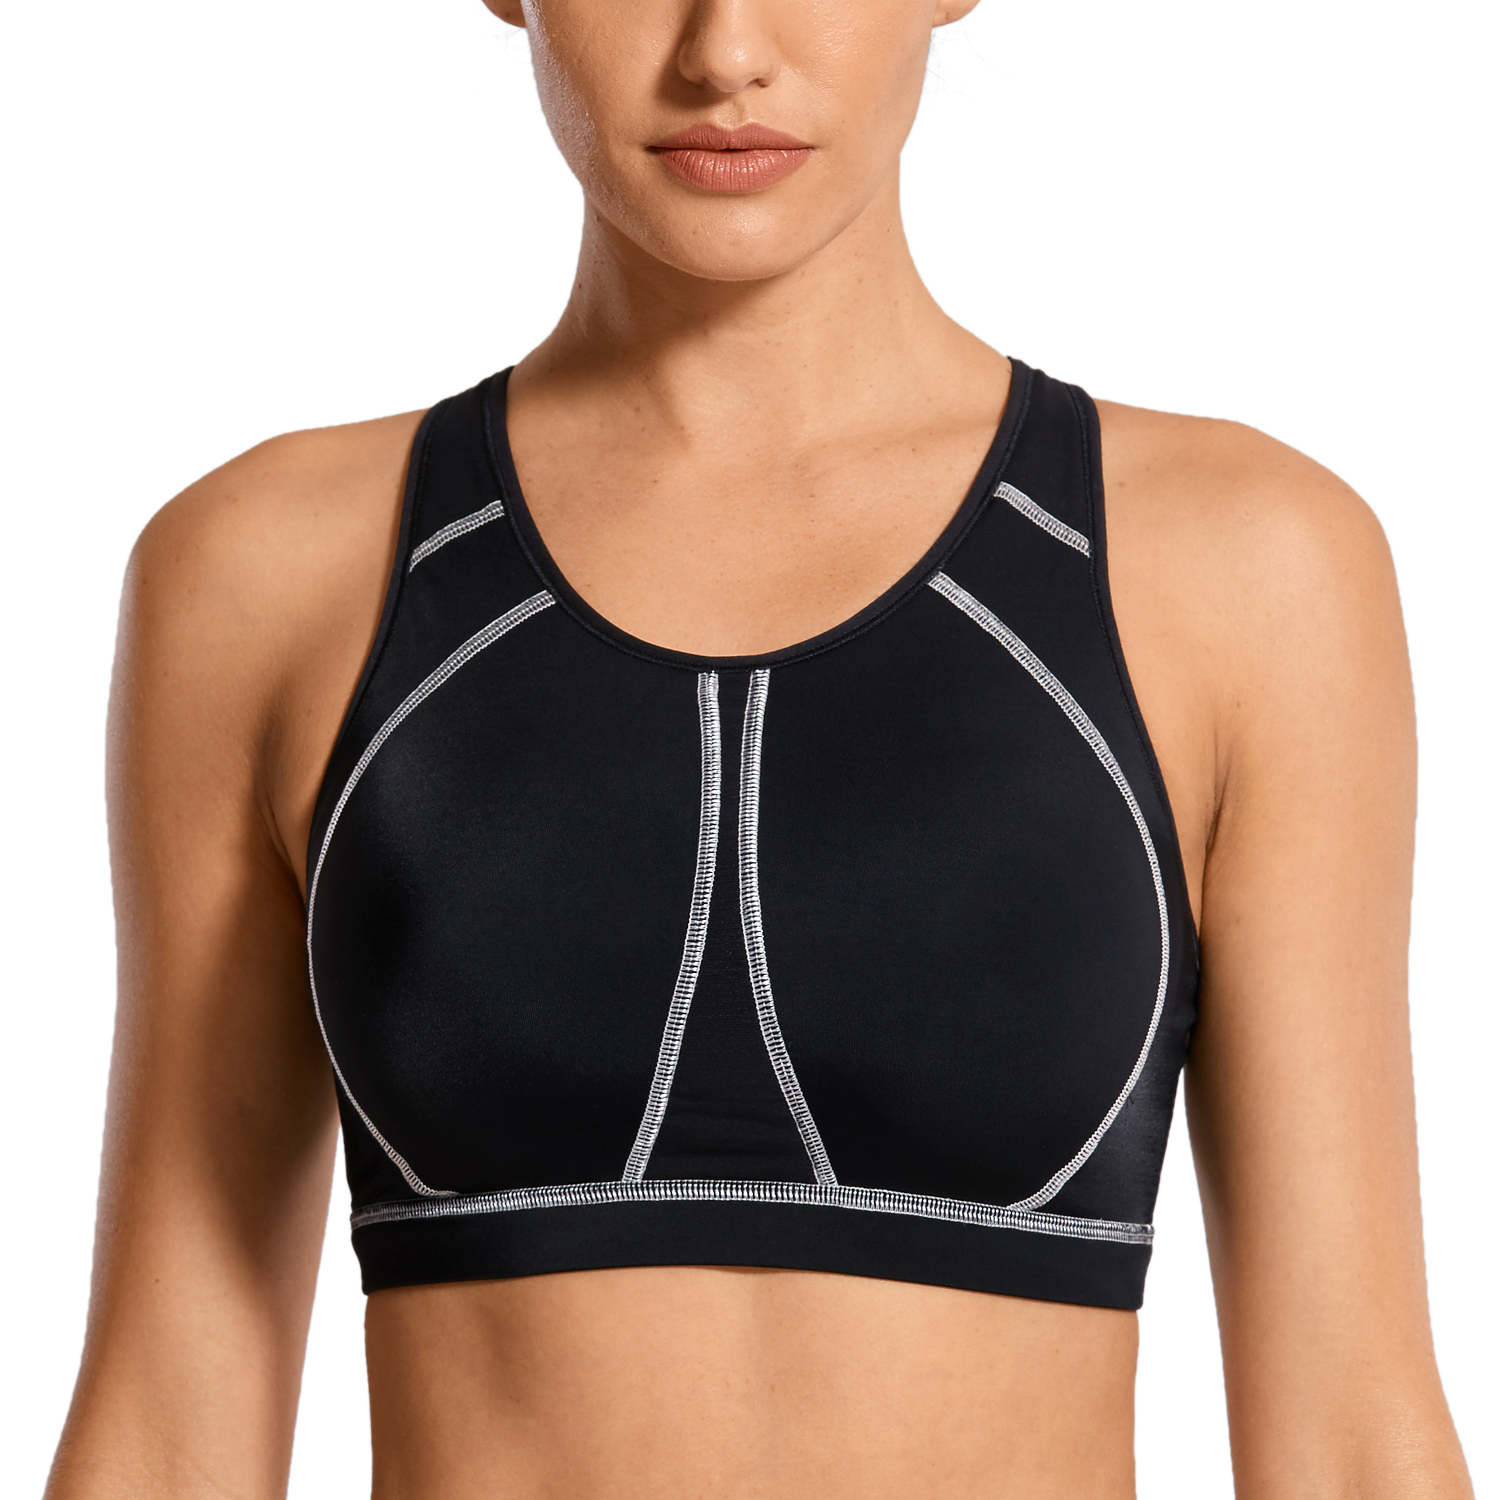 SYROKAN Women's High Impact Full Support Wire Free Padded Active  Sports Bra | eBay